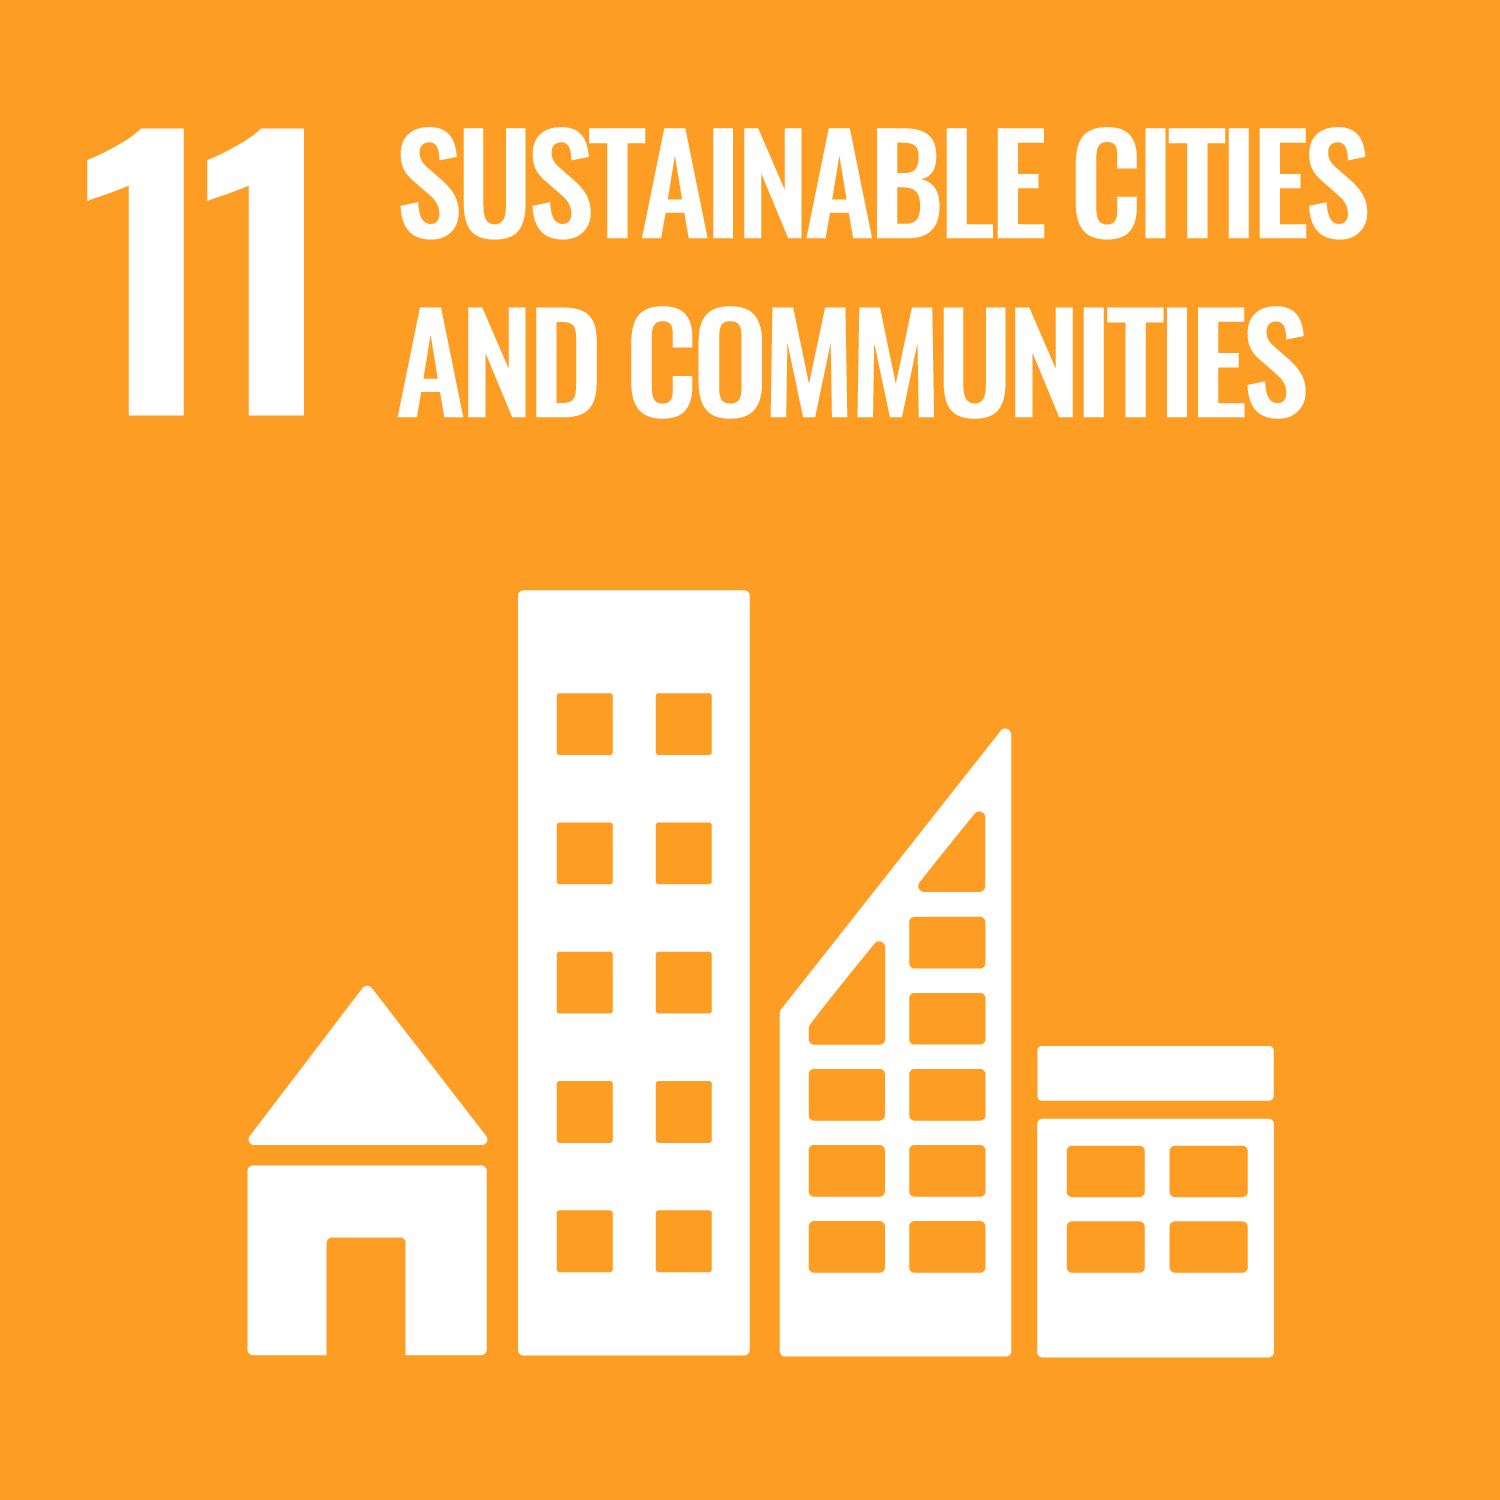 UN Sustainable Development Goals Number 11 Sustainable Cities and Communities